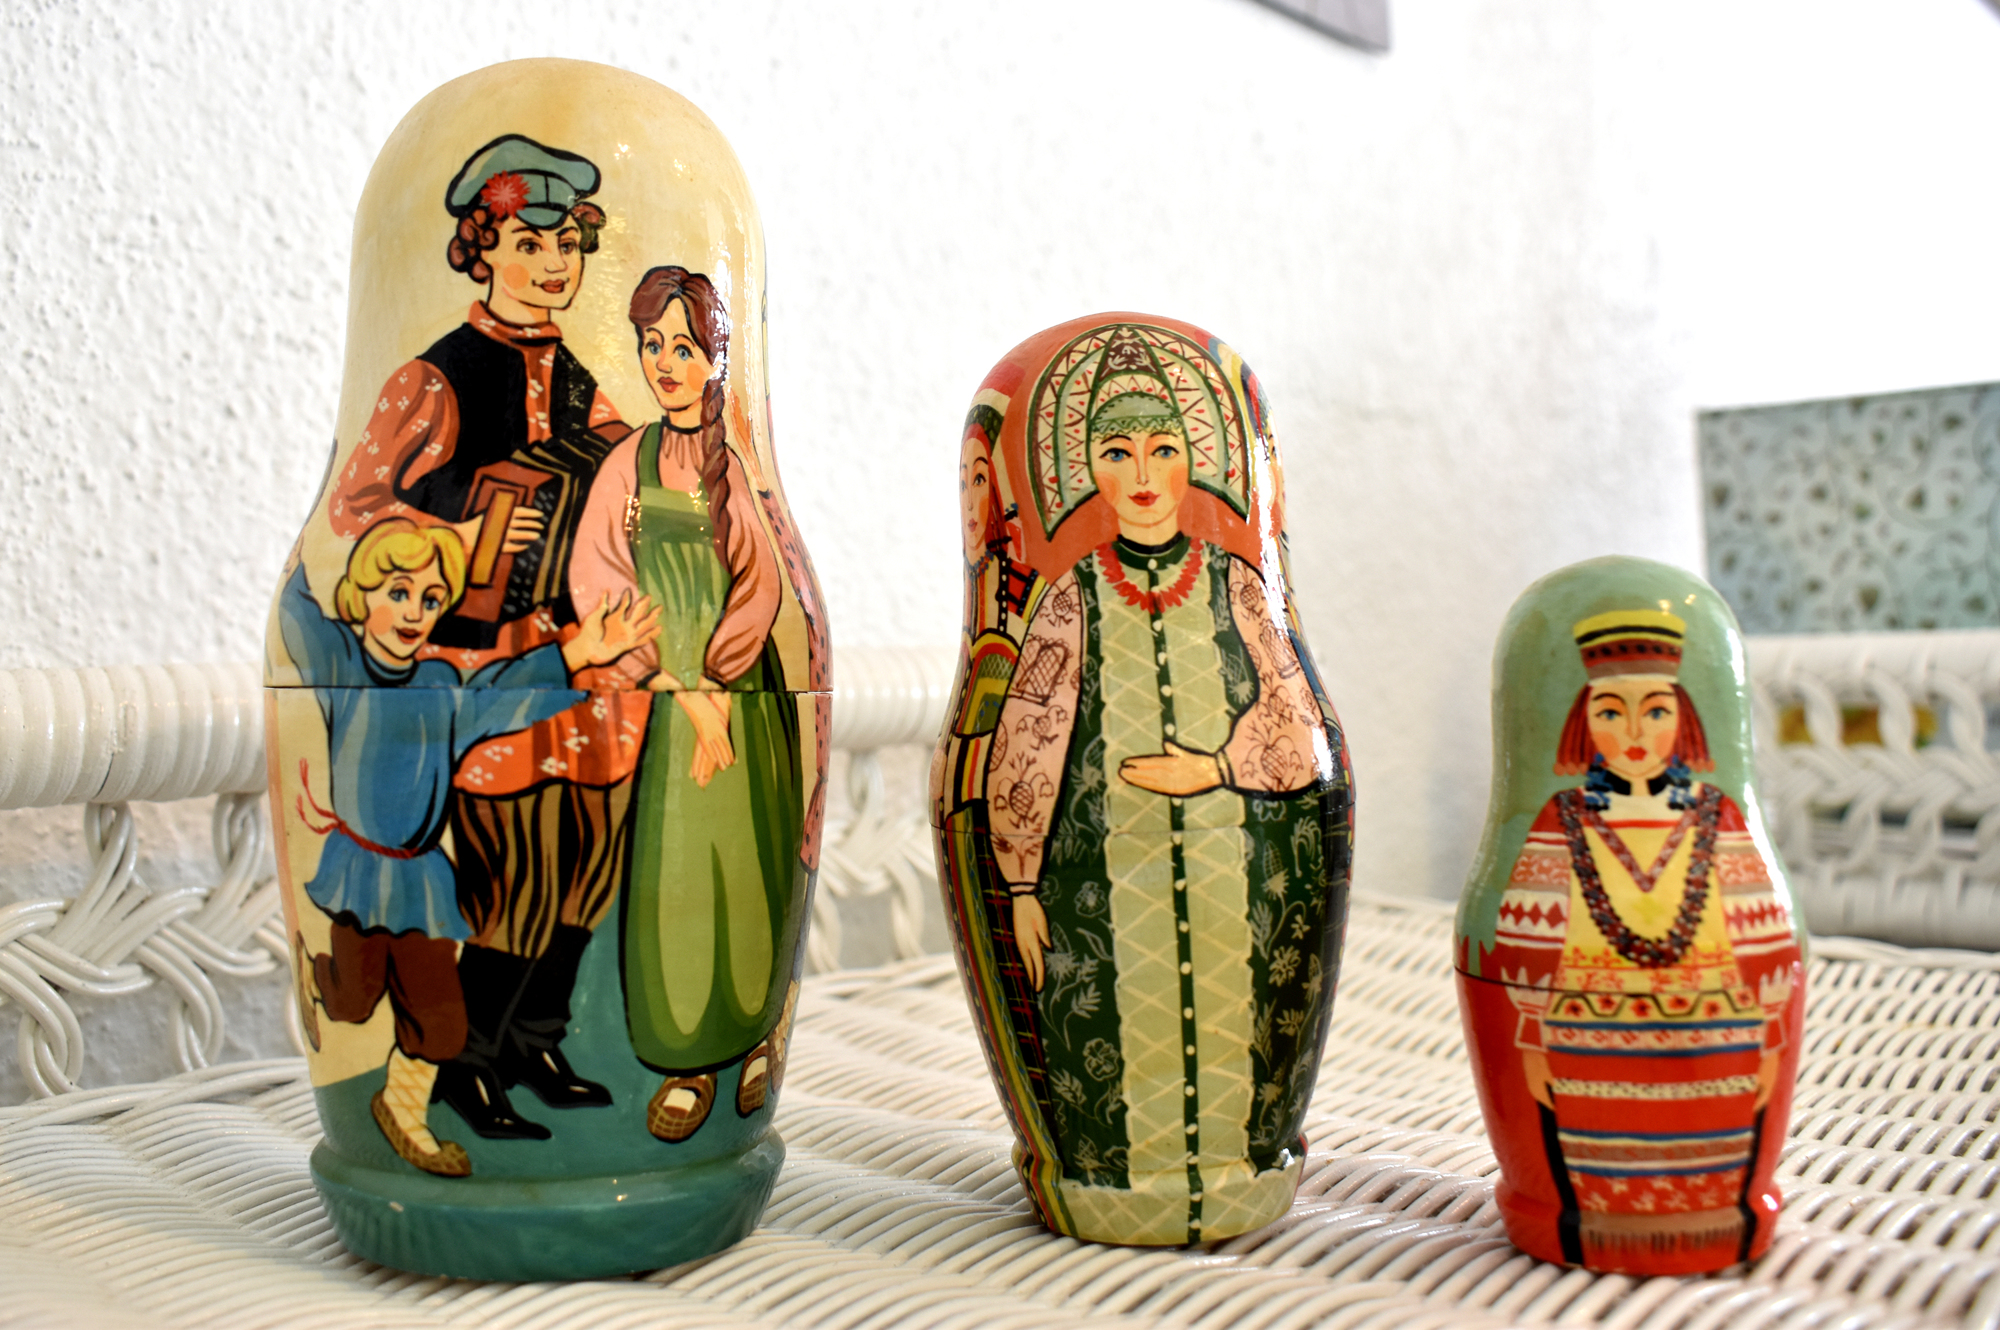 Irina LaRose was given this set  of Matryoshka dolls, or nesting dolls, as a gift from a client.